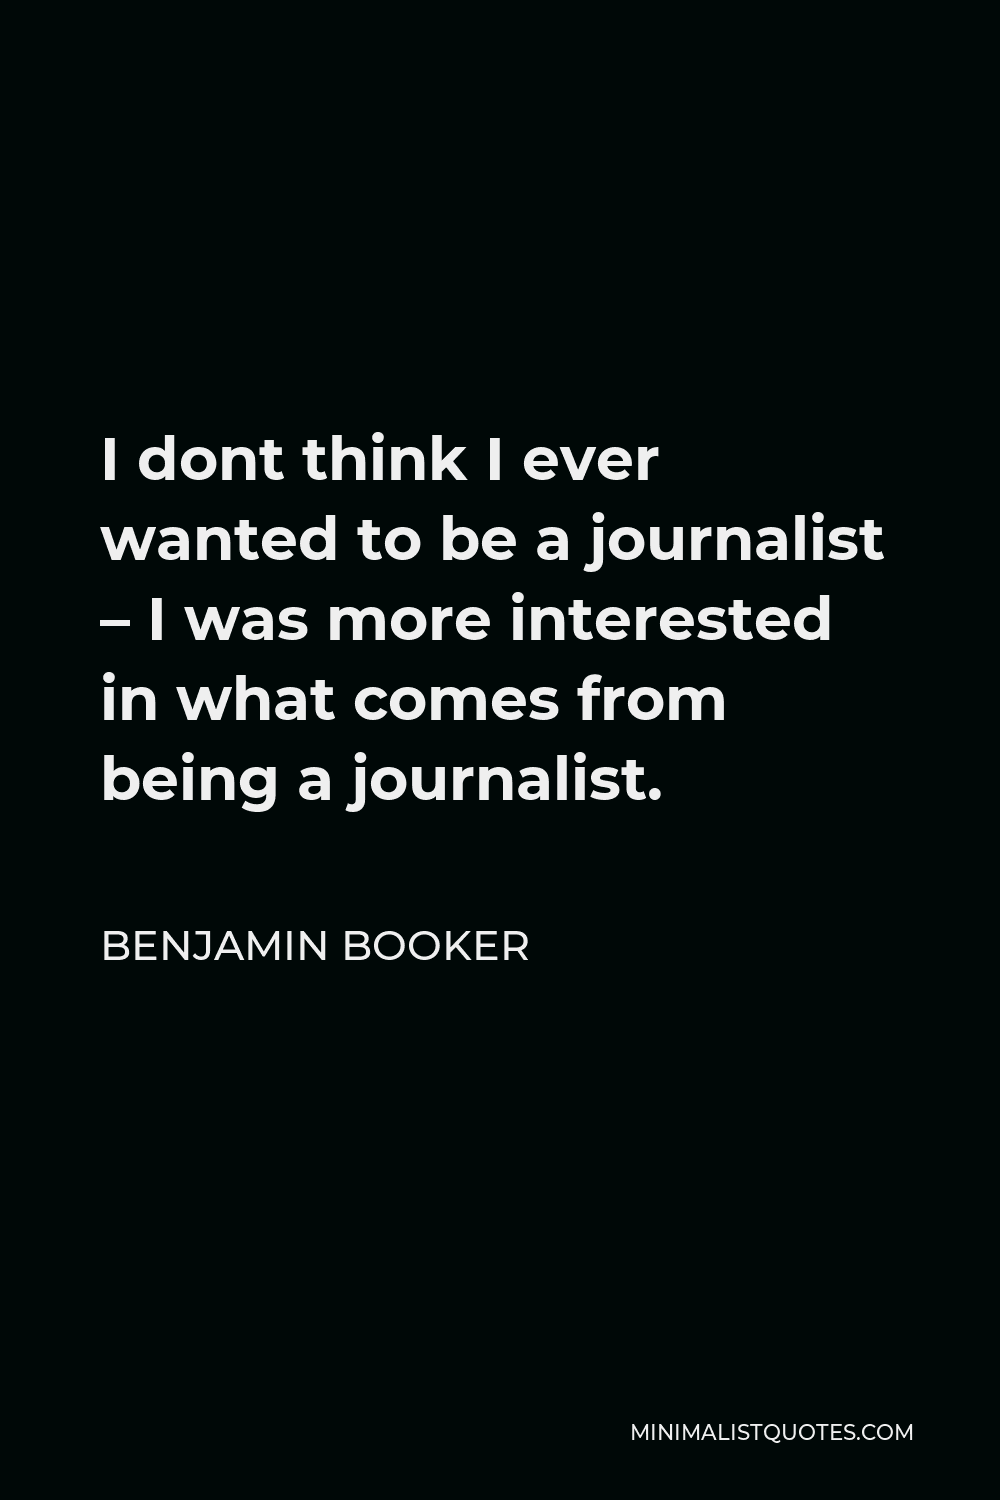 Benjamin Booker Quote - I dont think I ever wanted to be a journalist – I was more interested in what comes from being a journalist.